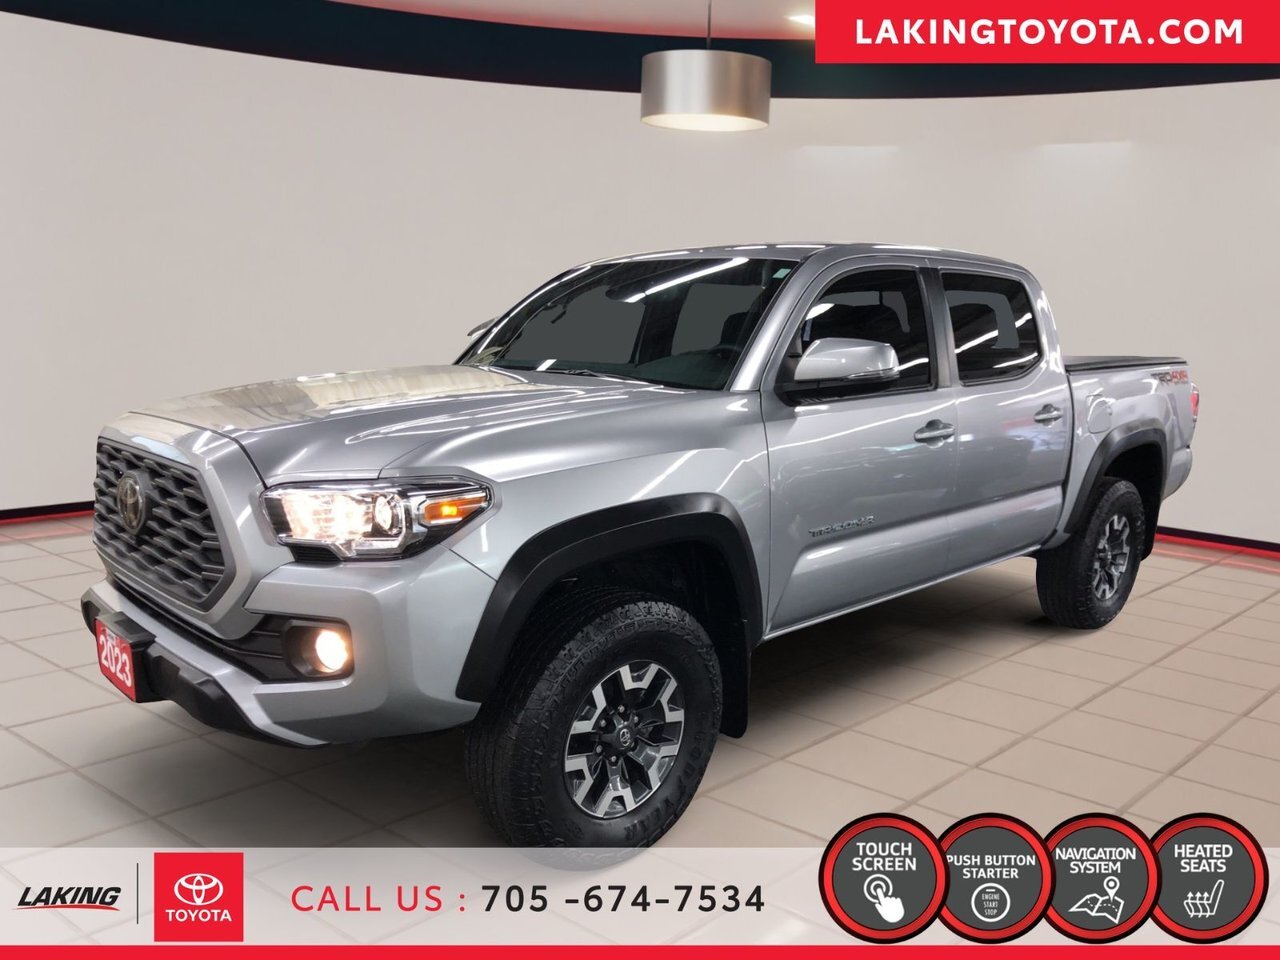 2023 Toyota Tacoma TRD 4X4 Off Road Double Cab This 2023 Tacoma offer